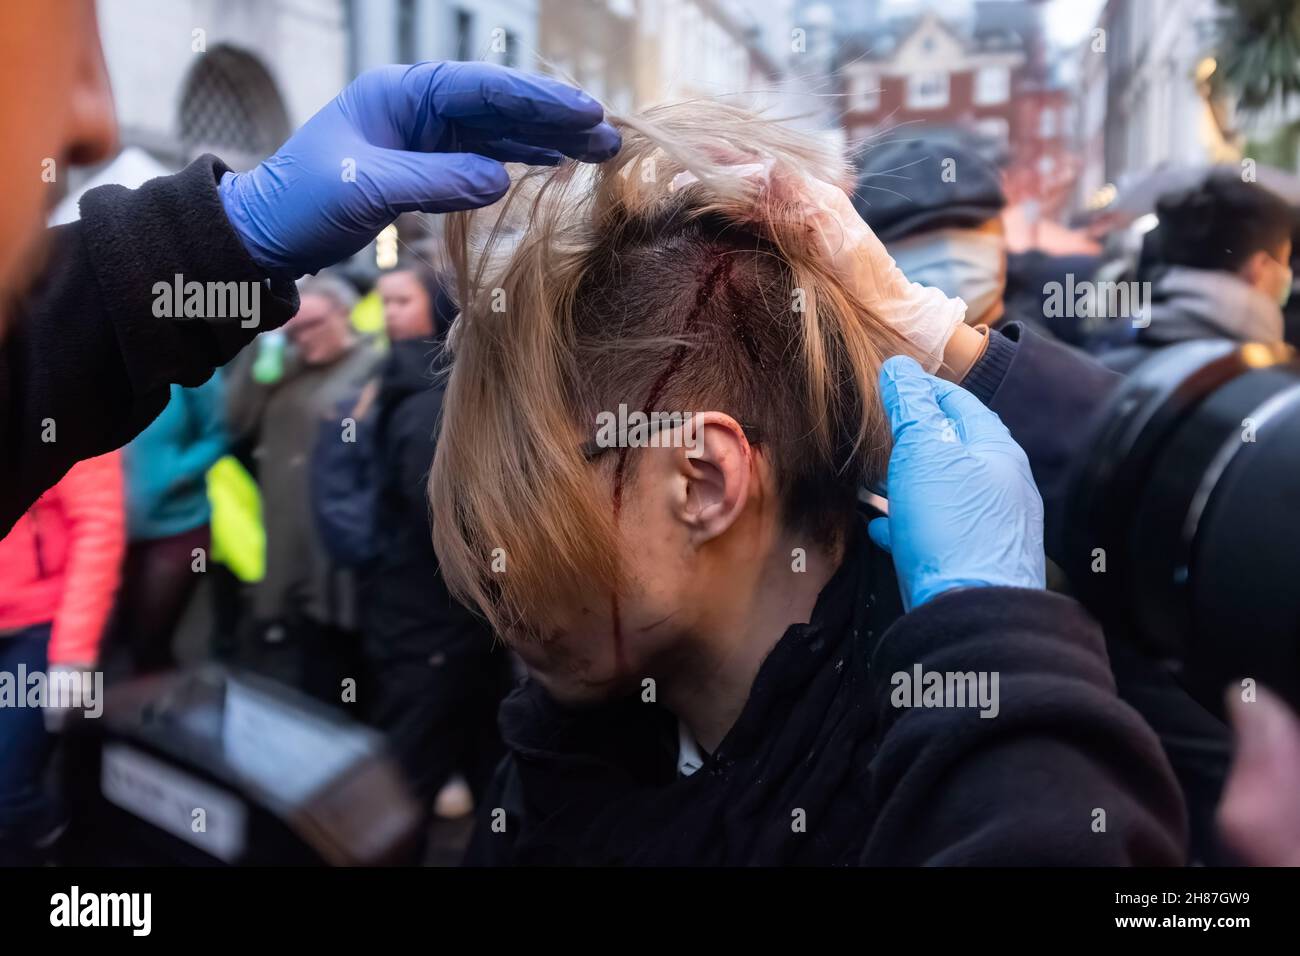 London, UK. 27th Nov, 2021. (EDITORS NOTE: Image contains graphic content) Bloody injuries seen on a head of a HongKonger after a scuffle between Pro-Beijing attendees and Hong Kong democracy protesters during the rally. 'Anti-Asian Hate' rally organized by Pro-Beijing protesters and 'Lunch with you' rally organized by Hong Kong democracy protesters, separately gather at the same spot in Chinatown in London. While Pro-Beijing group shouting No Anti-Asian Hate, Hongkongers came back with Resist Chinese Communist Party (CCP) and No to Genocide. Credit: SOPA Images Limited/Alamy Live News Stock Photo